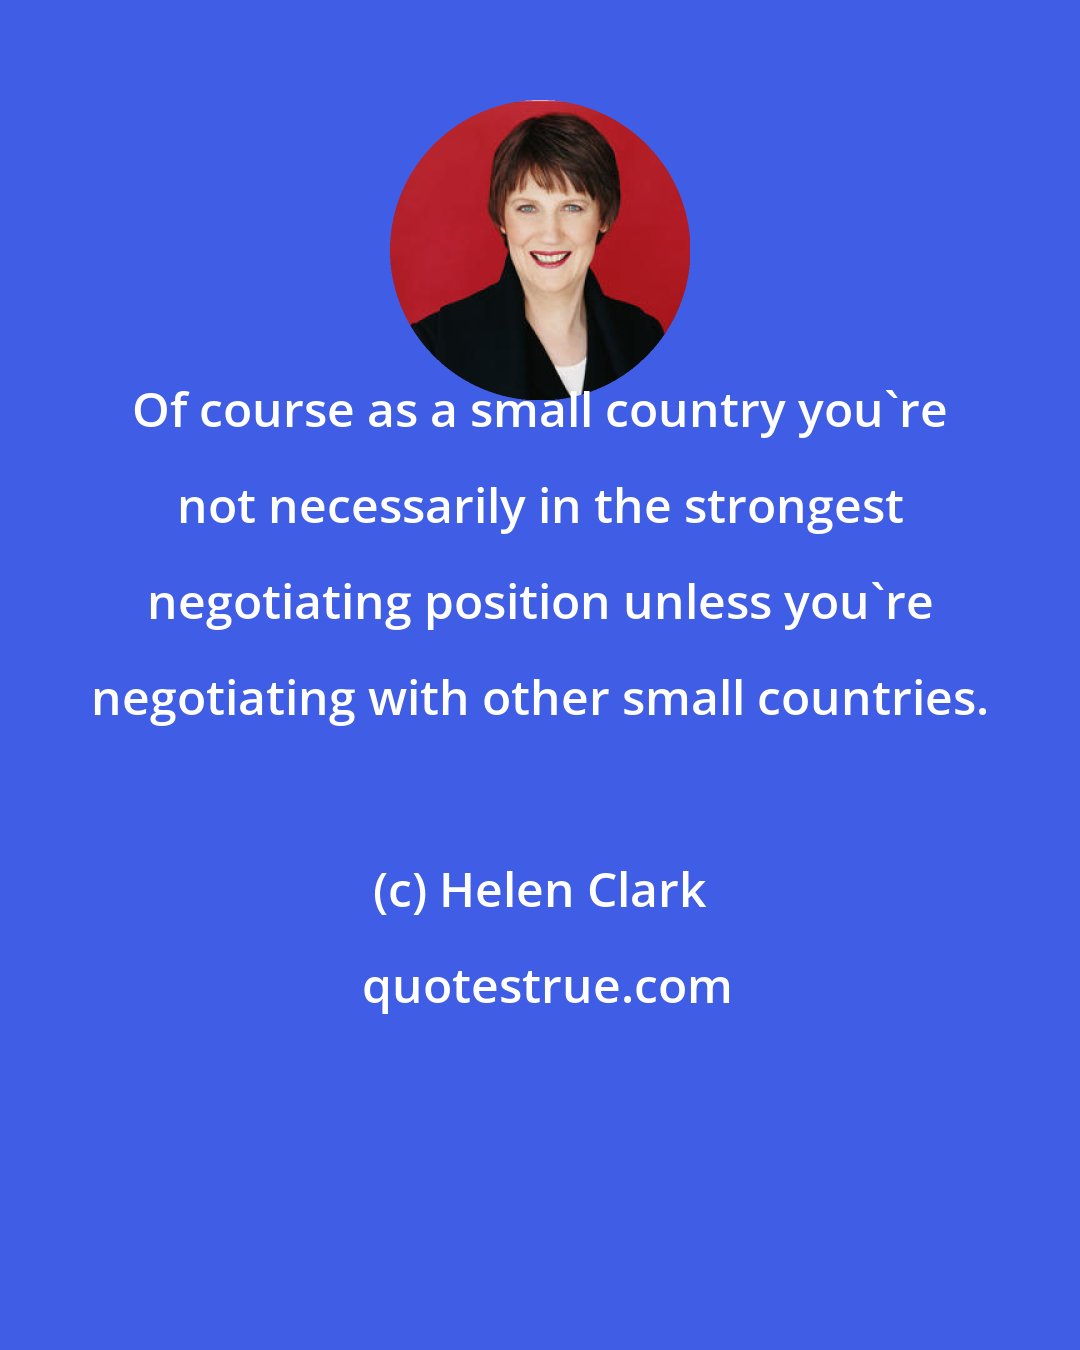 Helen Clark: Of course as a small country you're not necessarily in the strongest negotiating position unless you're negotiating with other small countries.